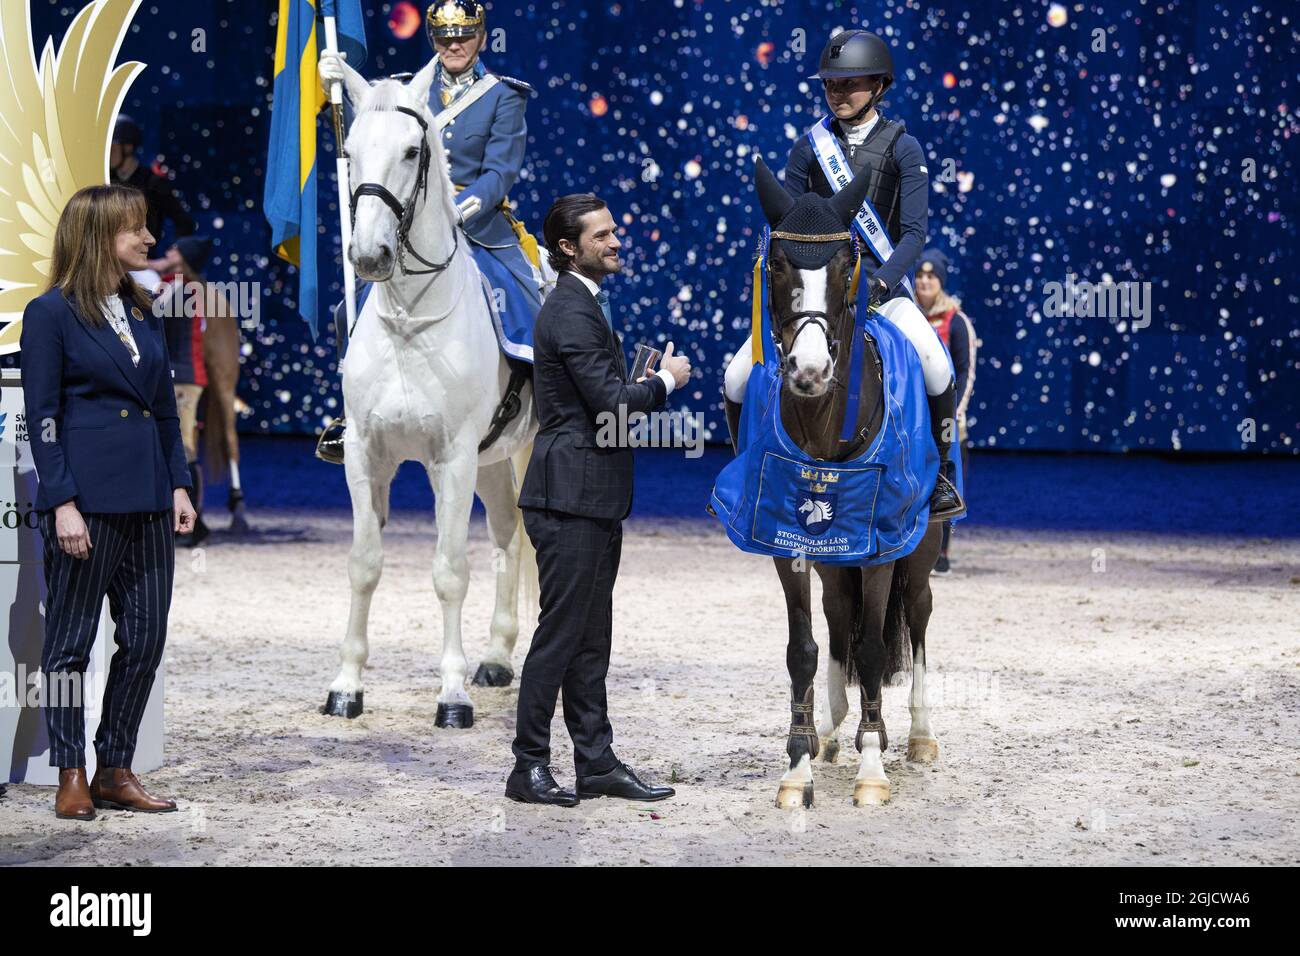 SOLNA 20191130 Swedens Prince Carl Philip awards Lilly Johansson, who won the Prince Carl Philips award at the Sweden International Horse Show in the Friends arena in Solna. Foto: Jessica Gow / TT kod 10070  Stock Photo